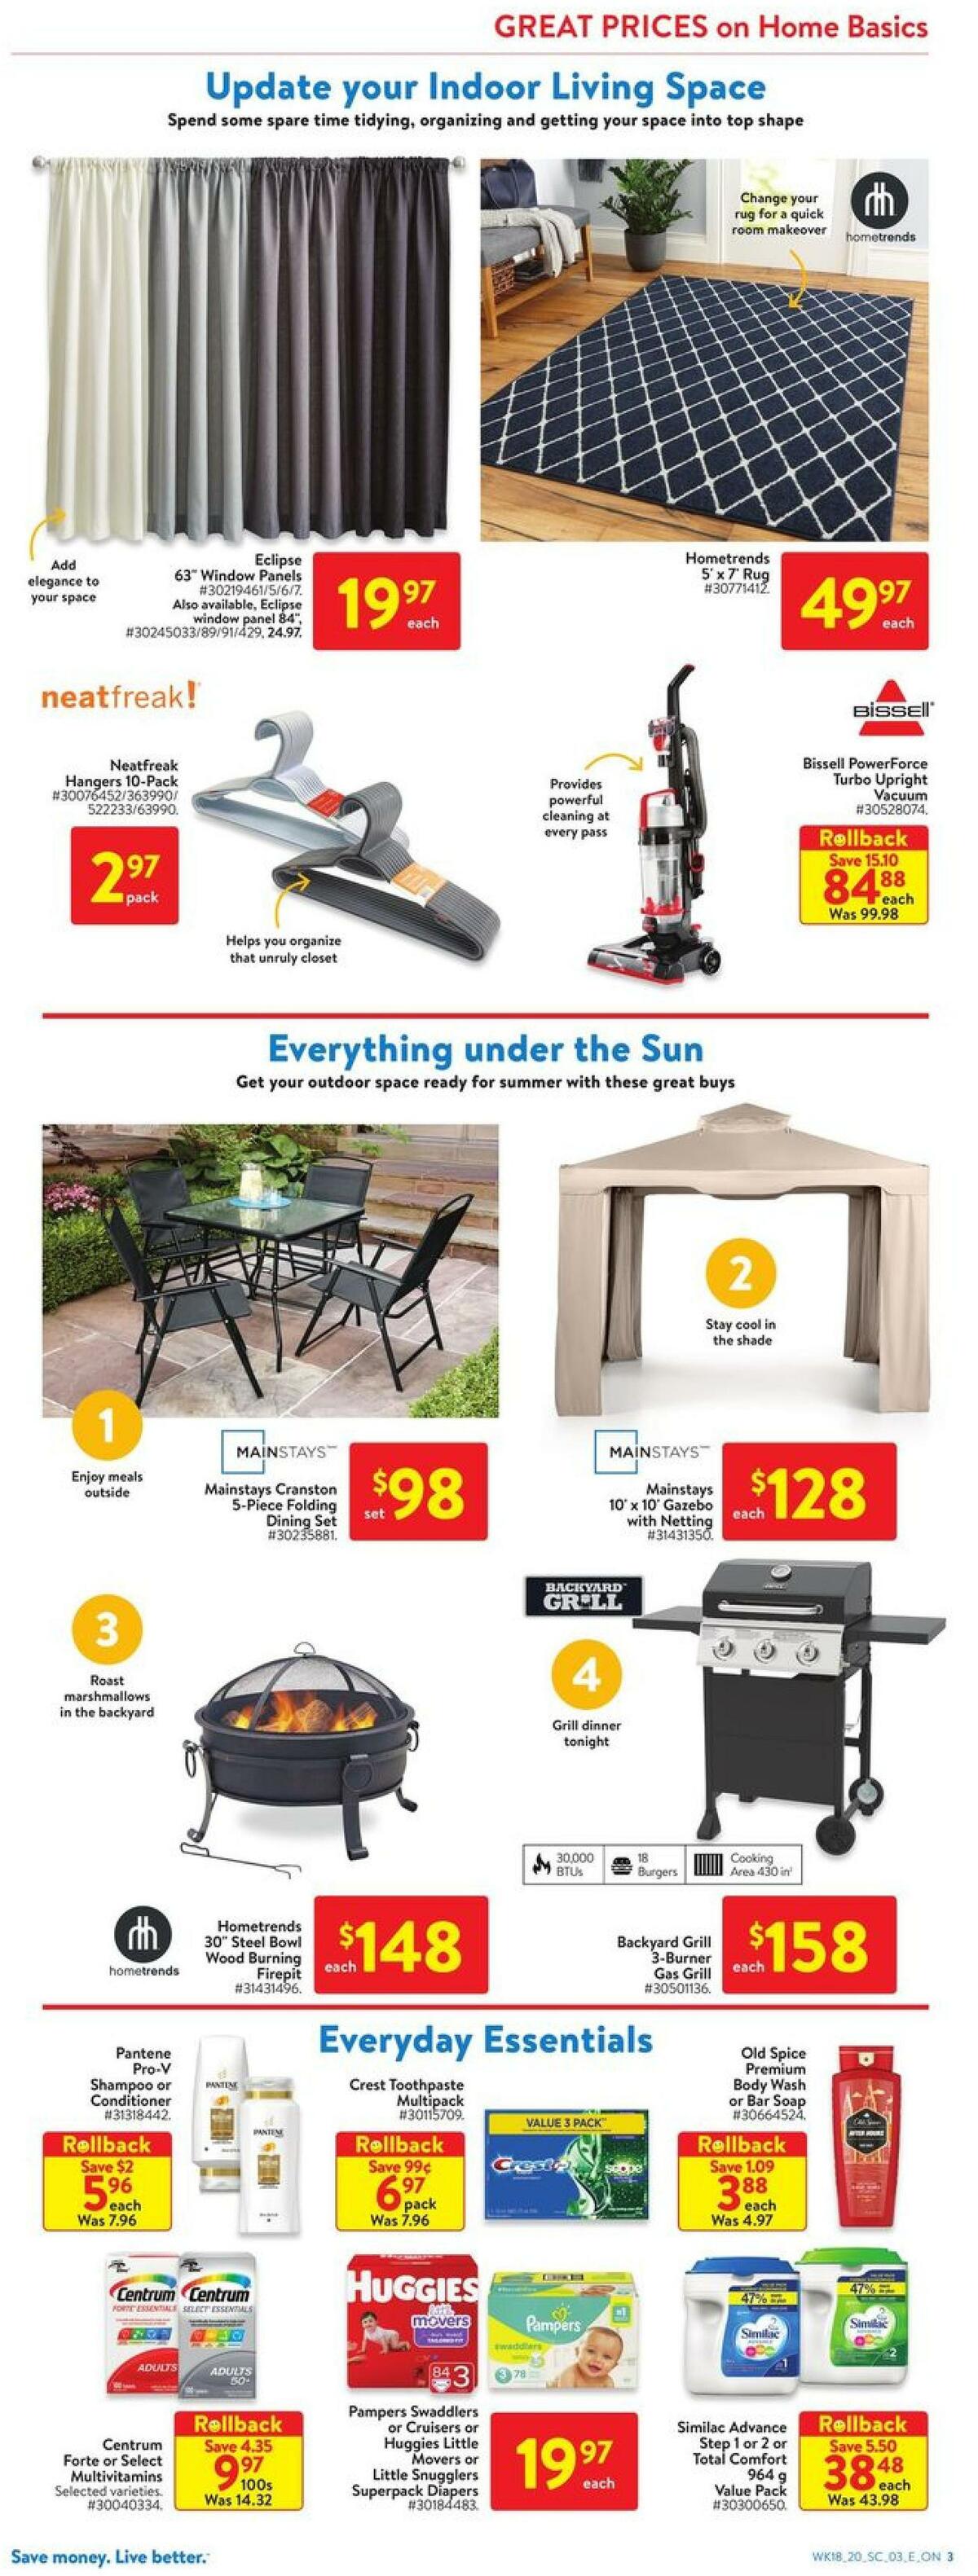 Walmart Flyer from May 28